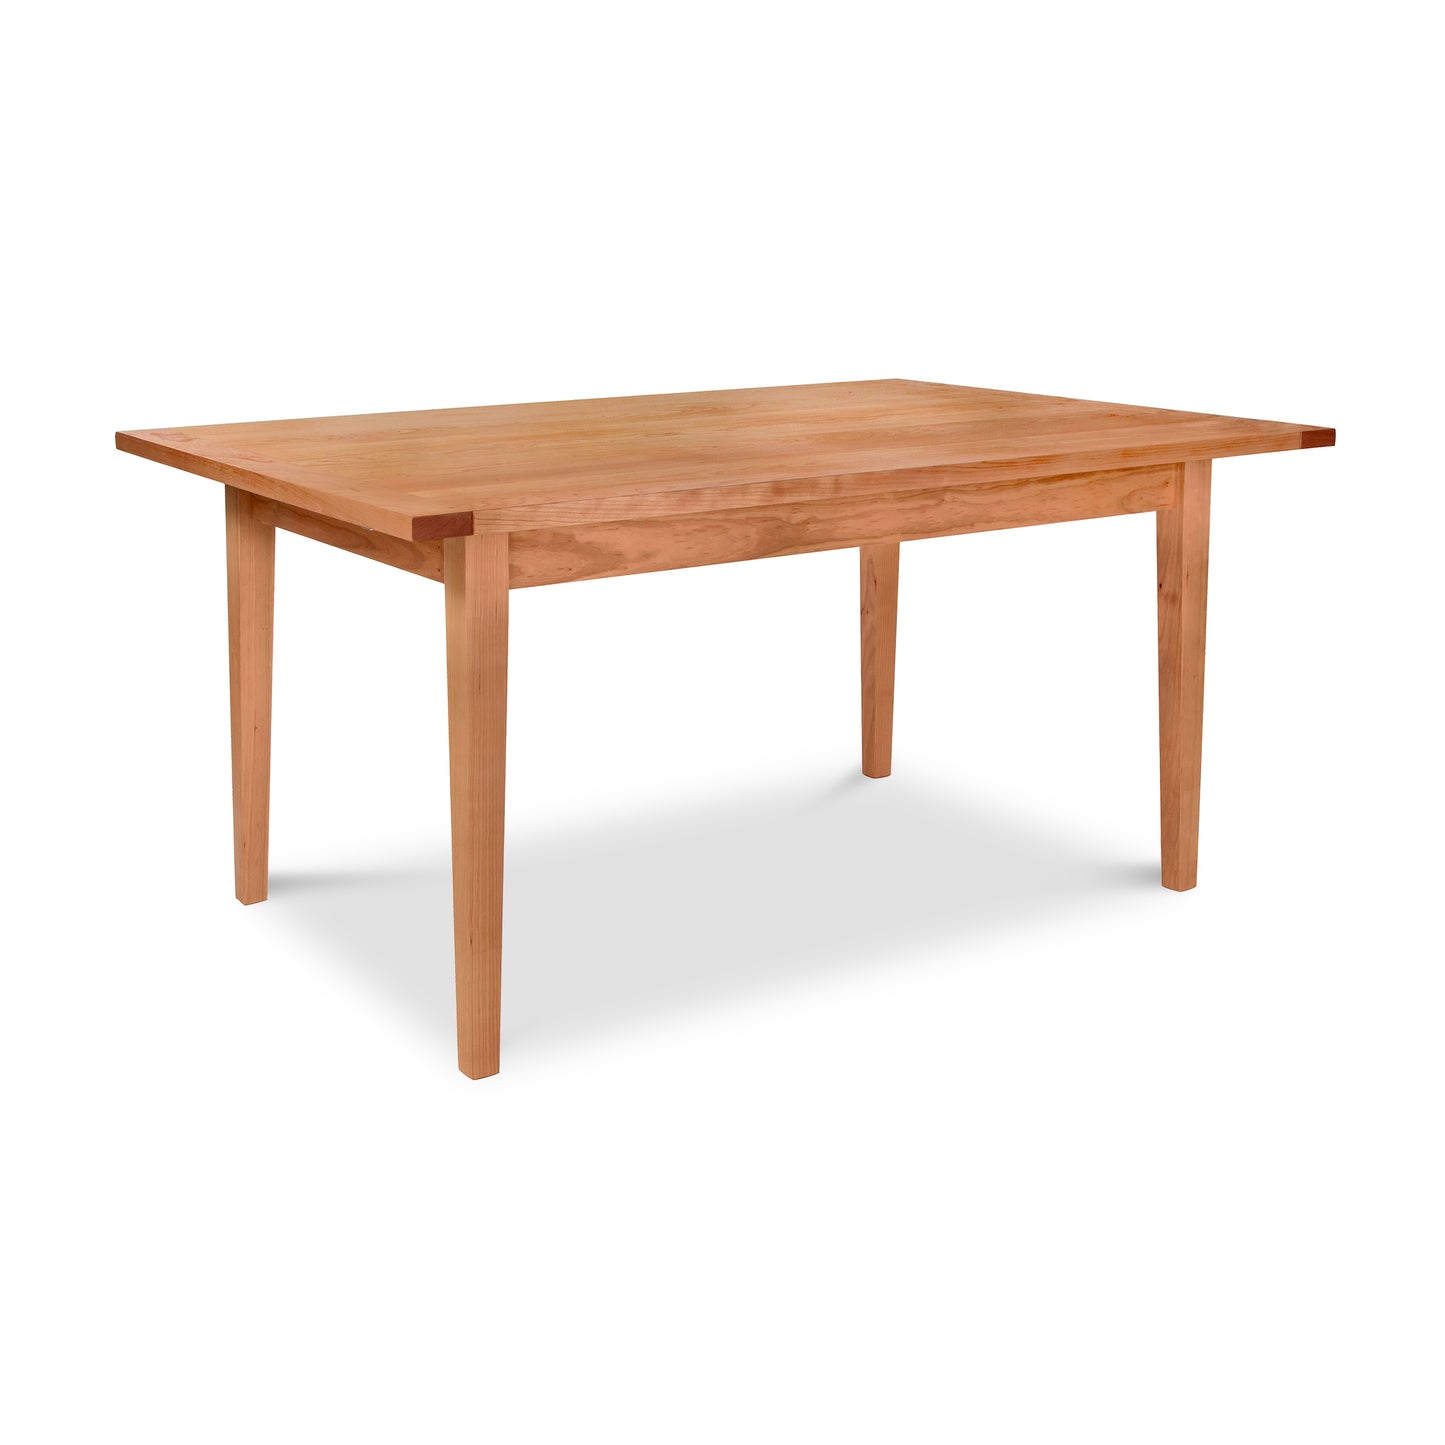 A Vermont Shaker Harvest Extension Dining Table by Maple Corner Woodworks with a rectangular top and four sturdy legs, isolated on a white background.